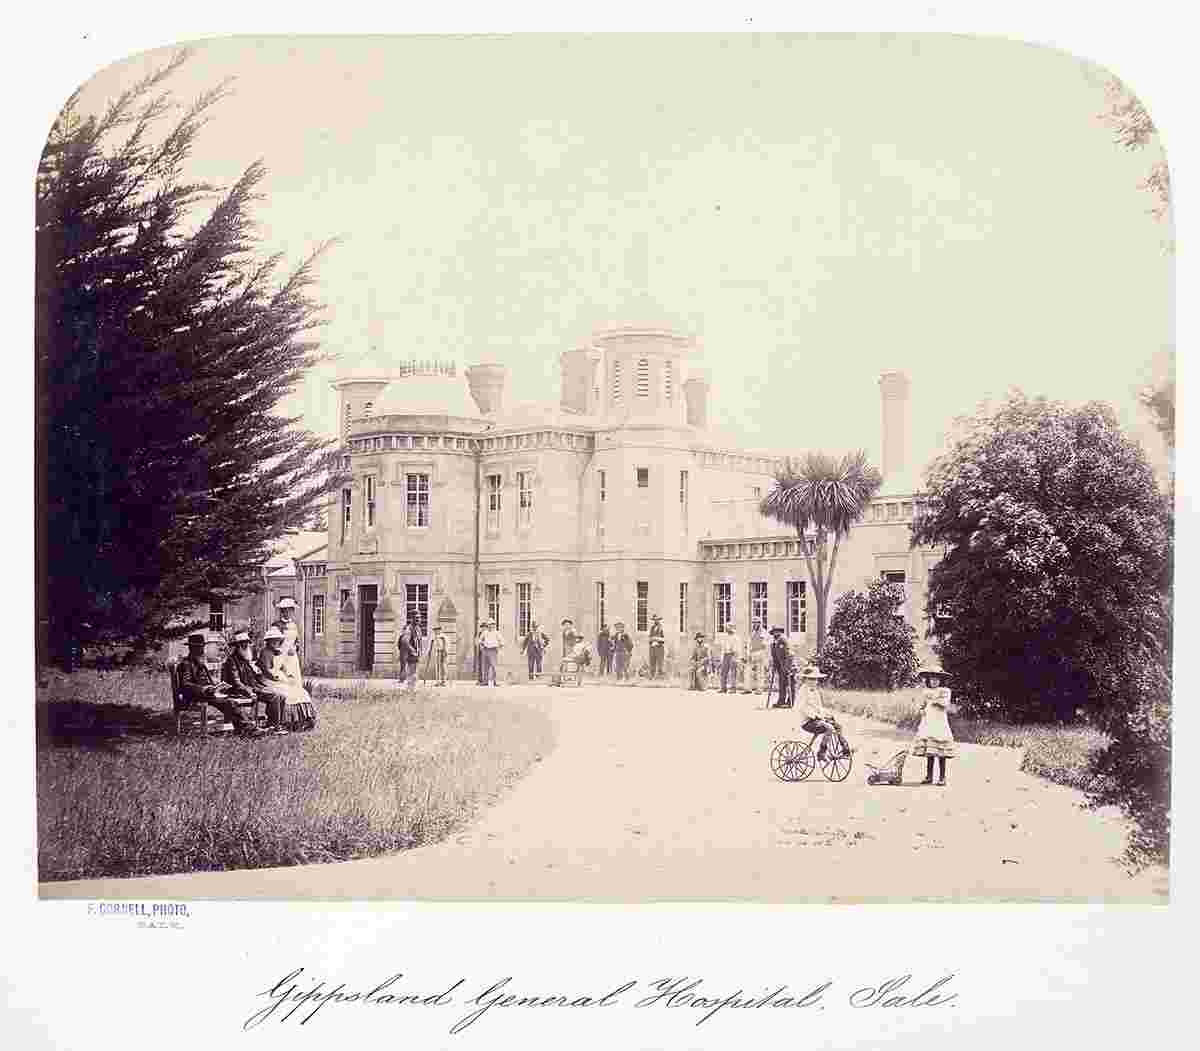 Sale. Gippsland General Hospital, between 1866 and 1885